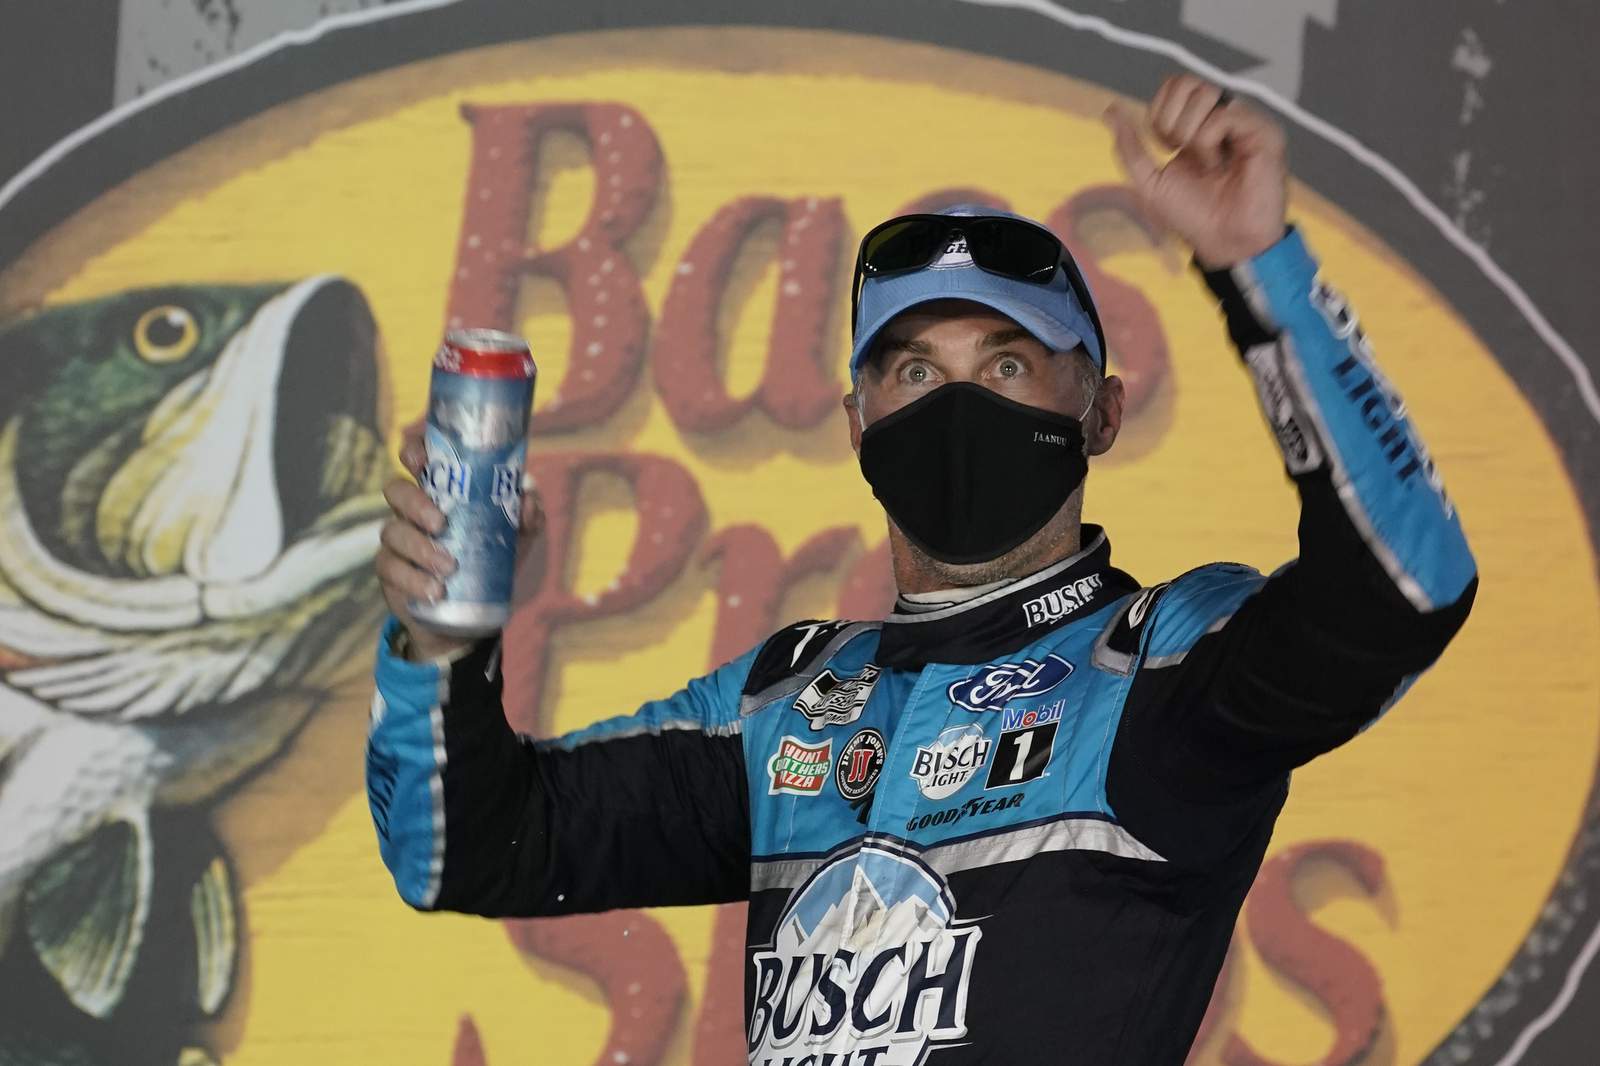 Harvick nabs 9th win of season to roll into second round